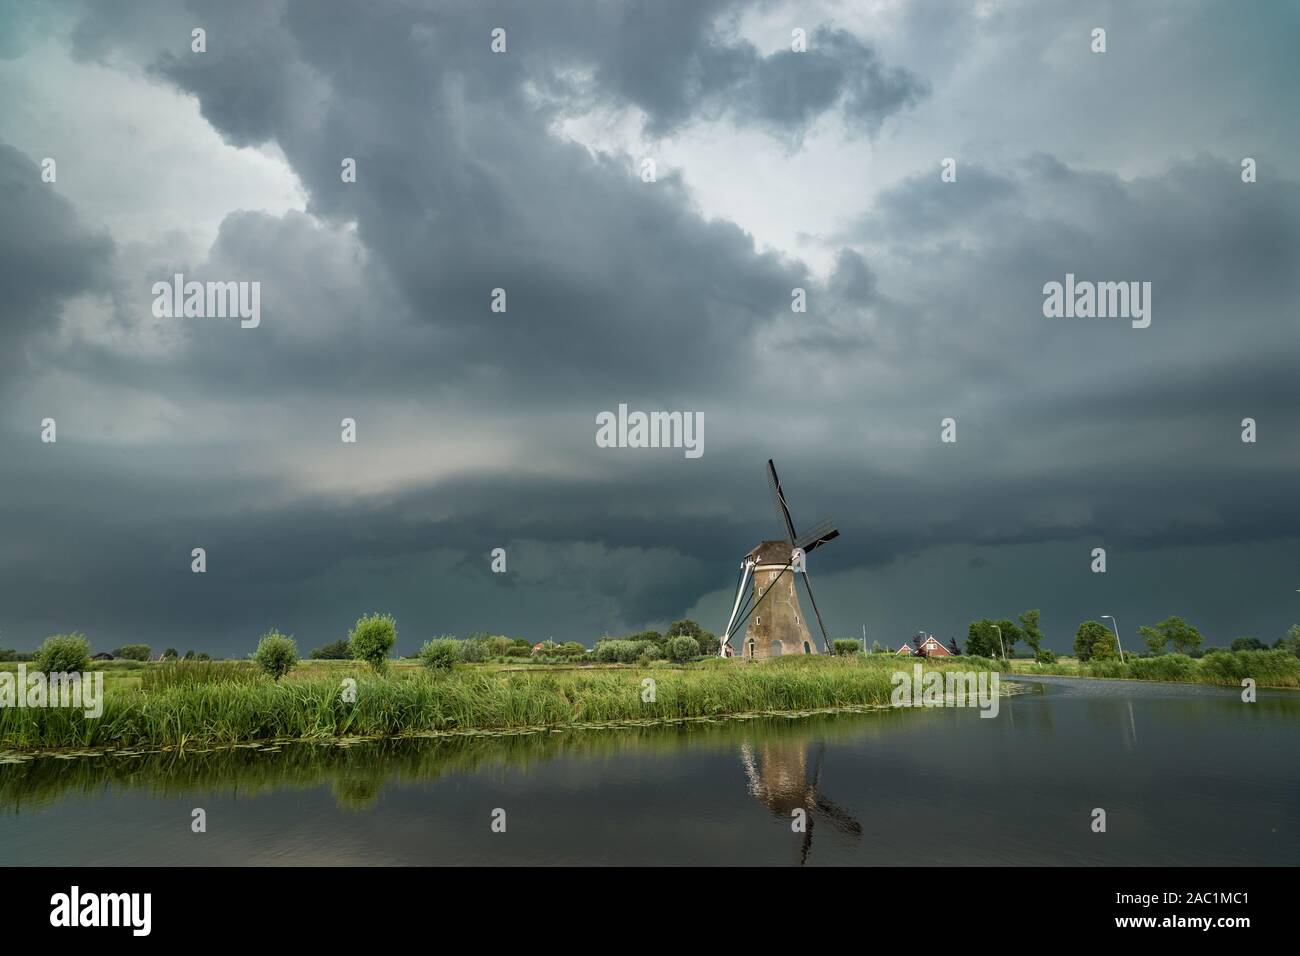 Classic dutch windmill with a stormy sky in the background. Shelfcloud of a severe thunderstorm over the wide open landscape of Holland. Stock Photo